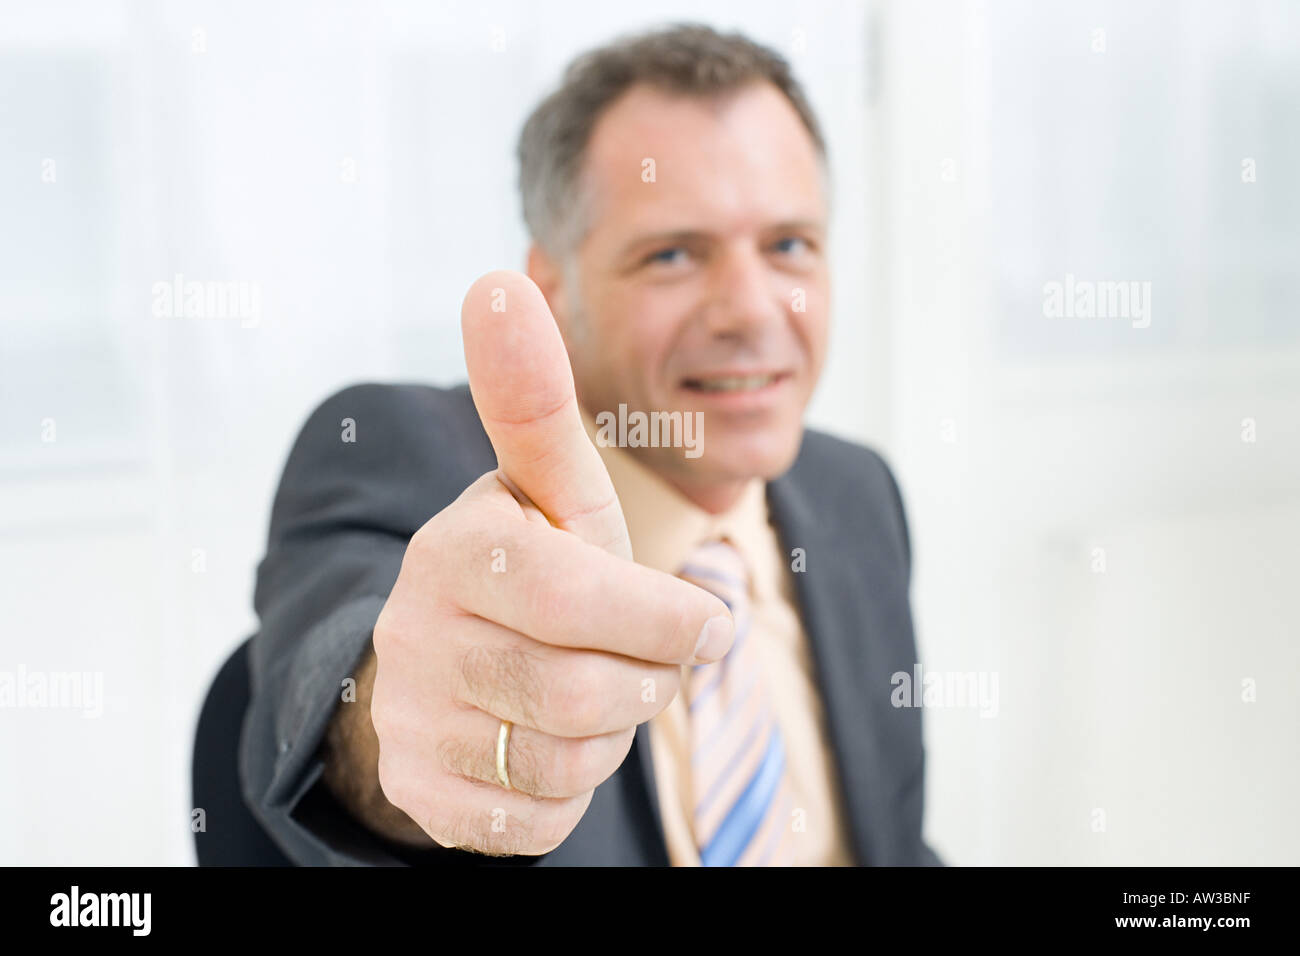 Man giving thumbs up Stock Photo